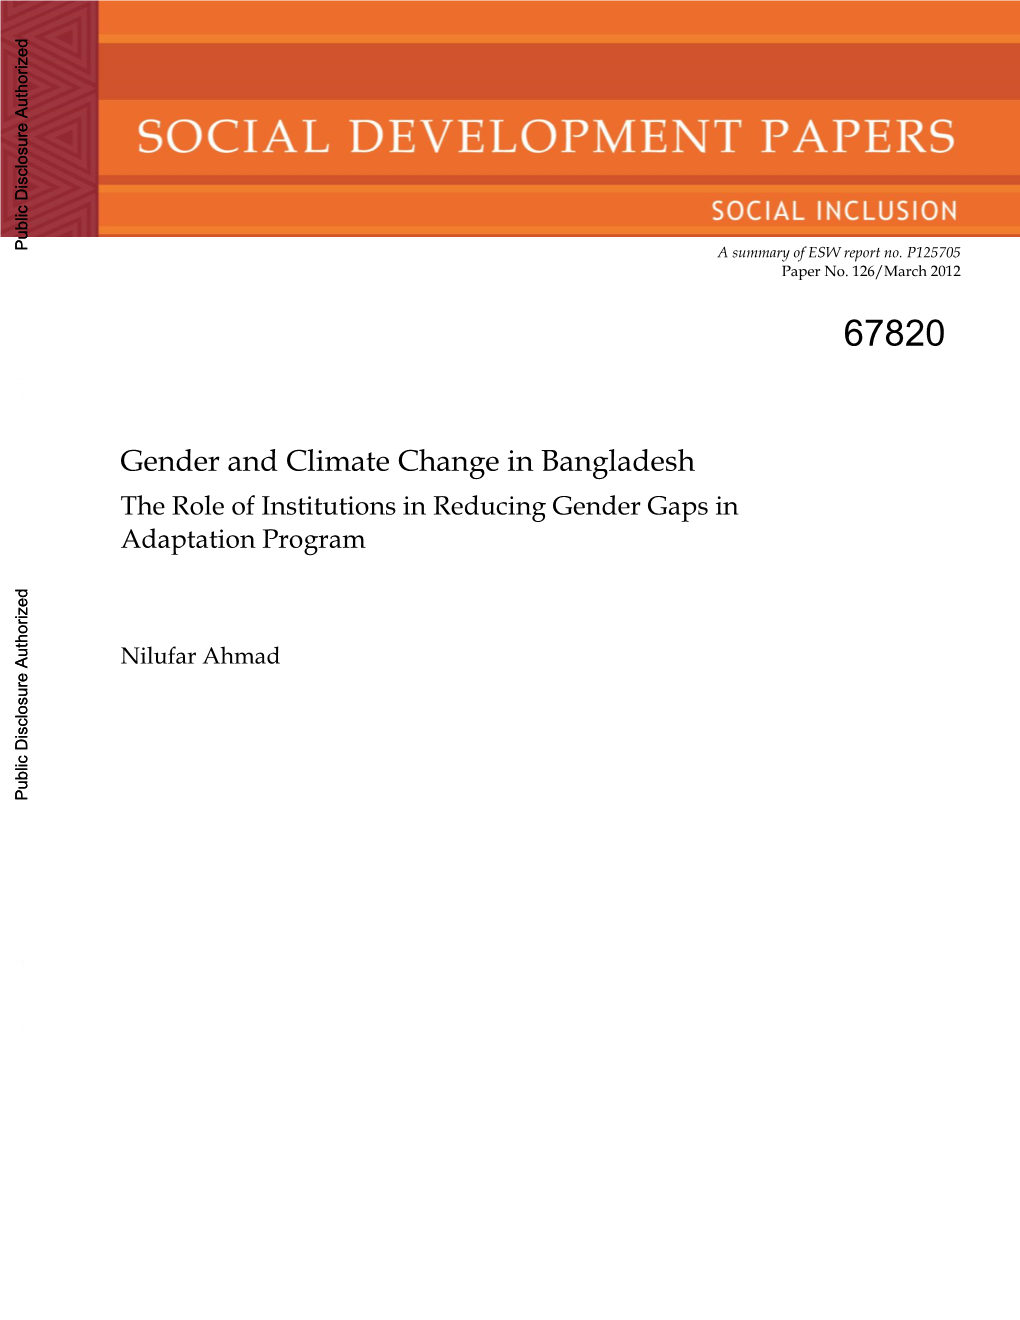 And Climate Change in Bangladesh the Role of Institutions in Reducing Gender Gaps in Public Disclosure Authorized Adaptation Program